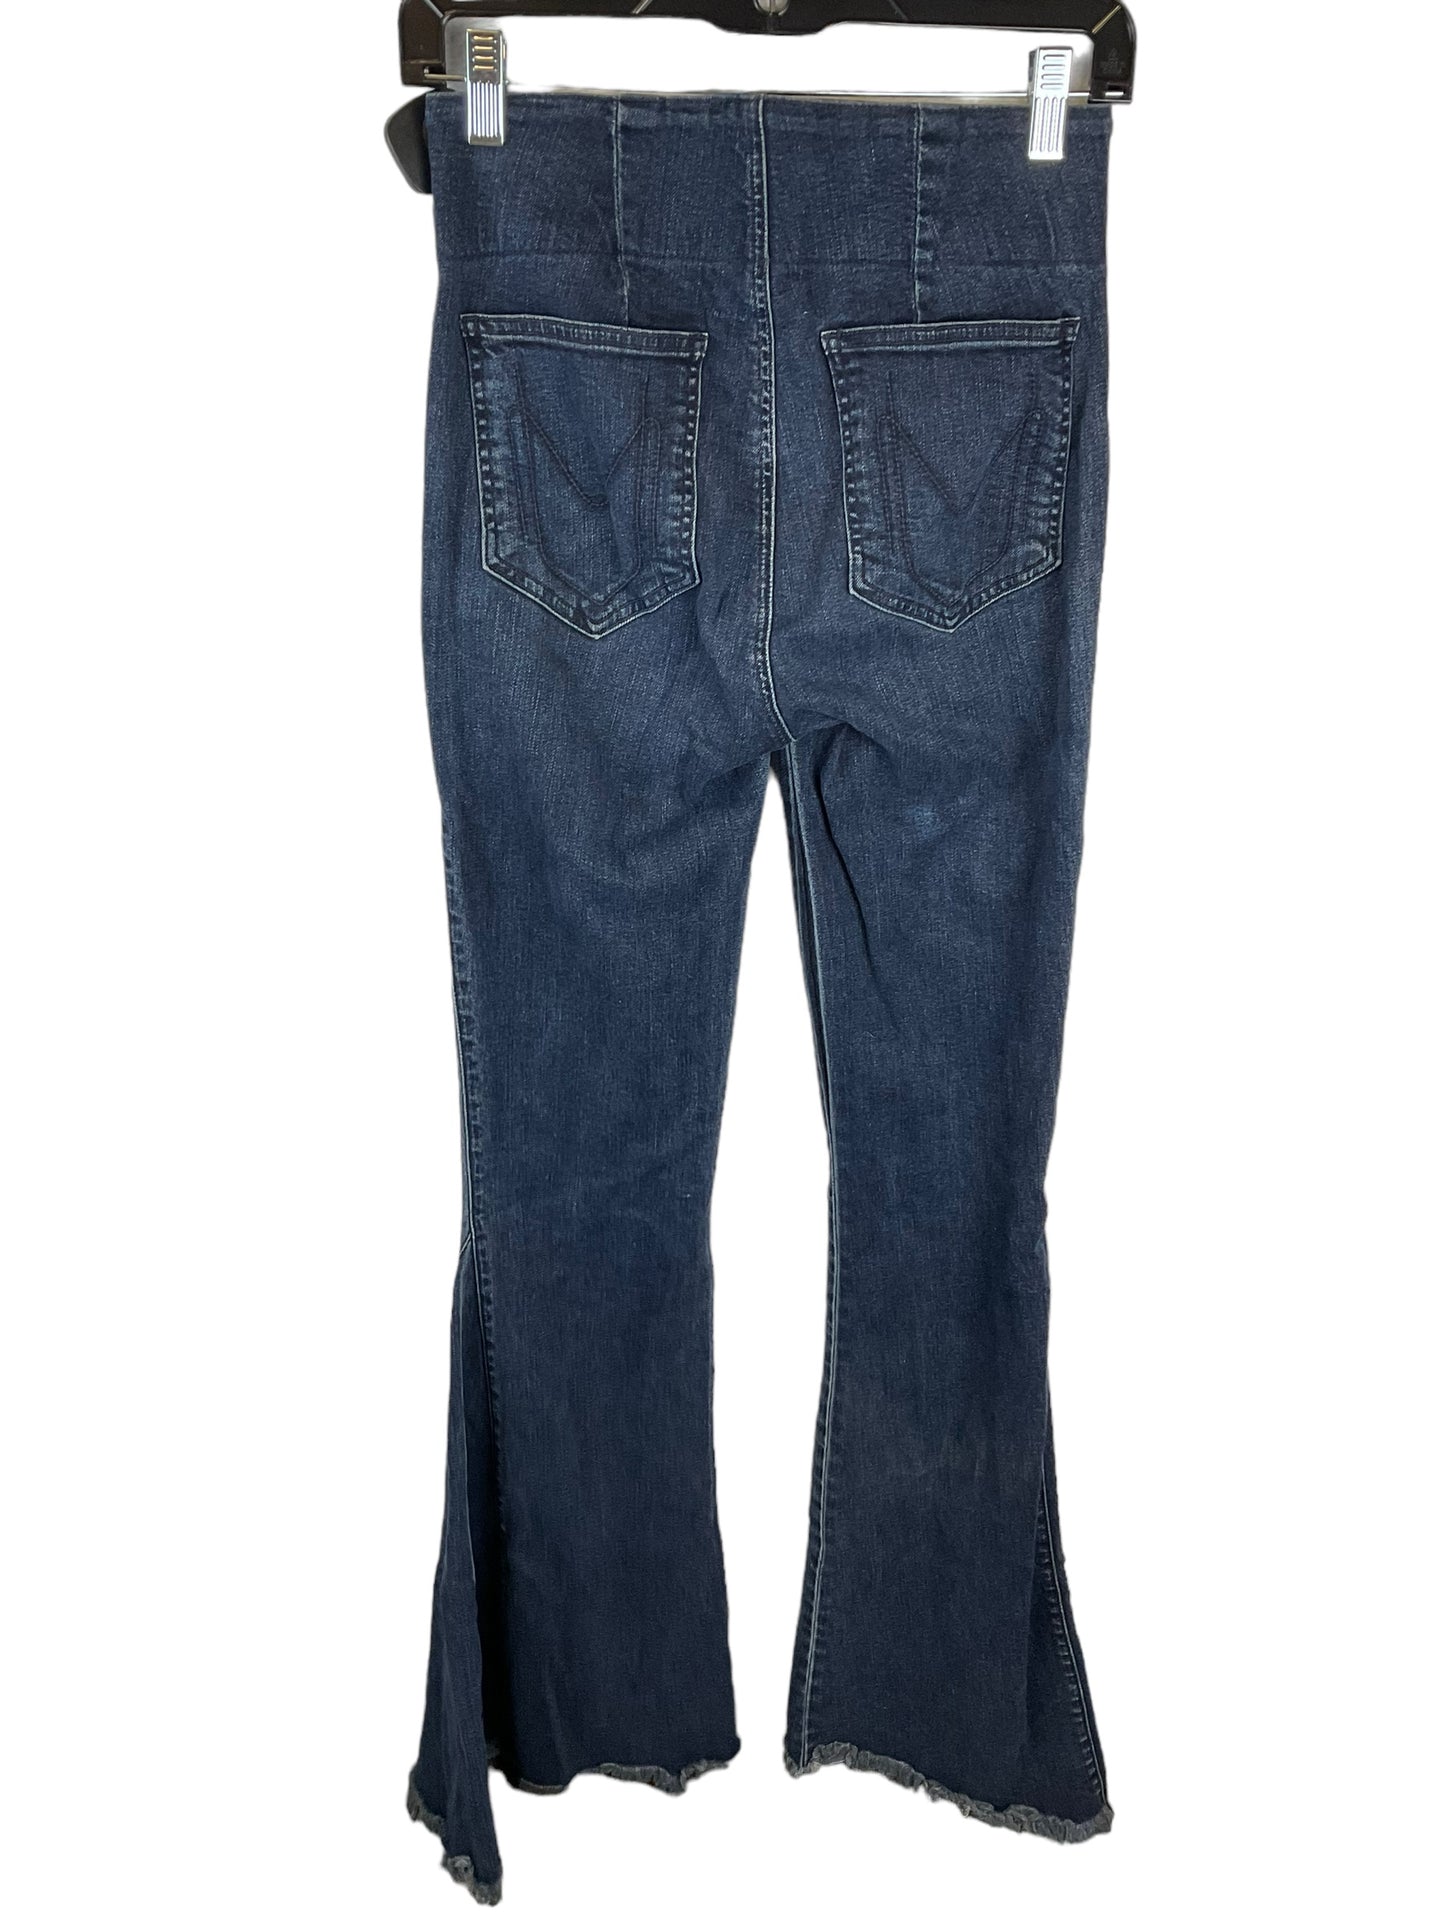 Jeans Flared By Mumu  Size: M